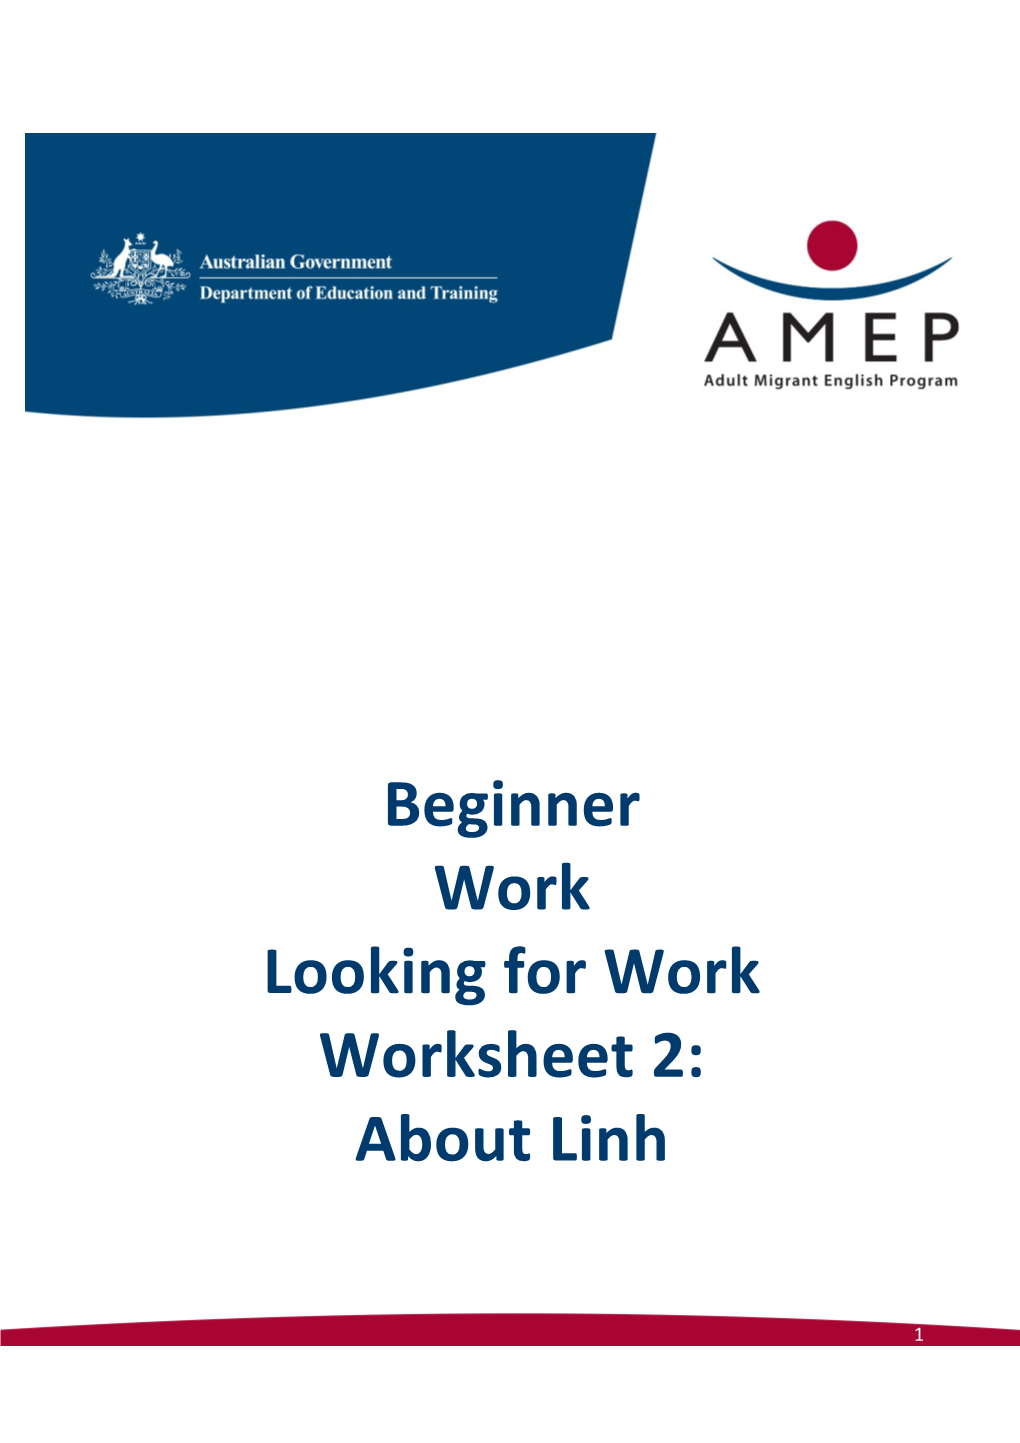 Beginner Work Looking for Work Worksheet 2: About Linh